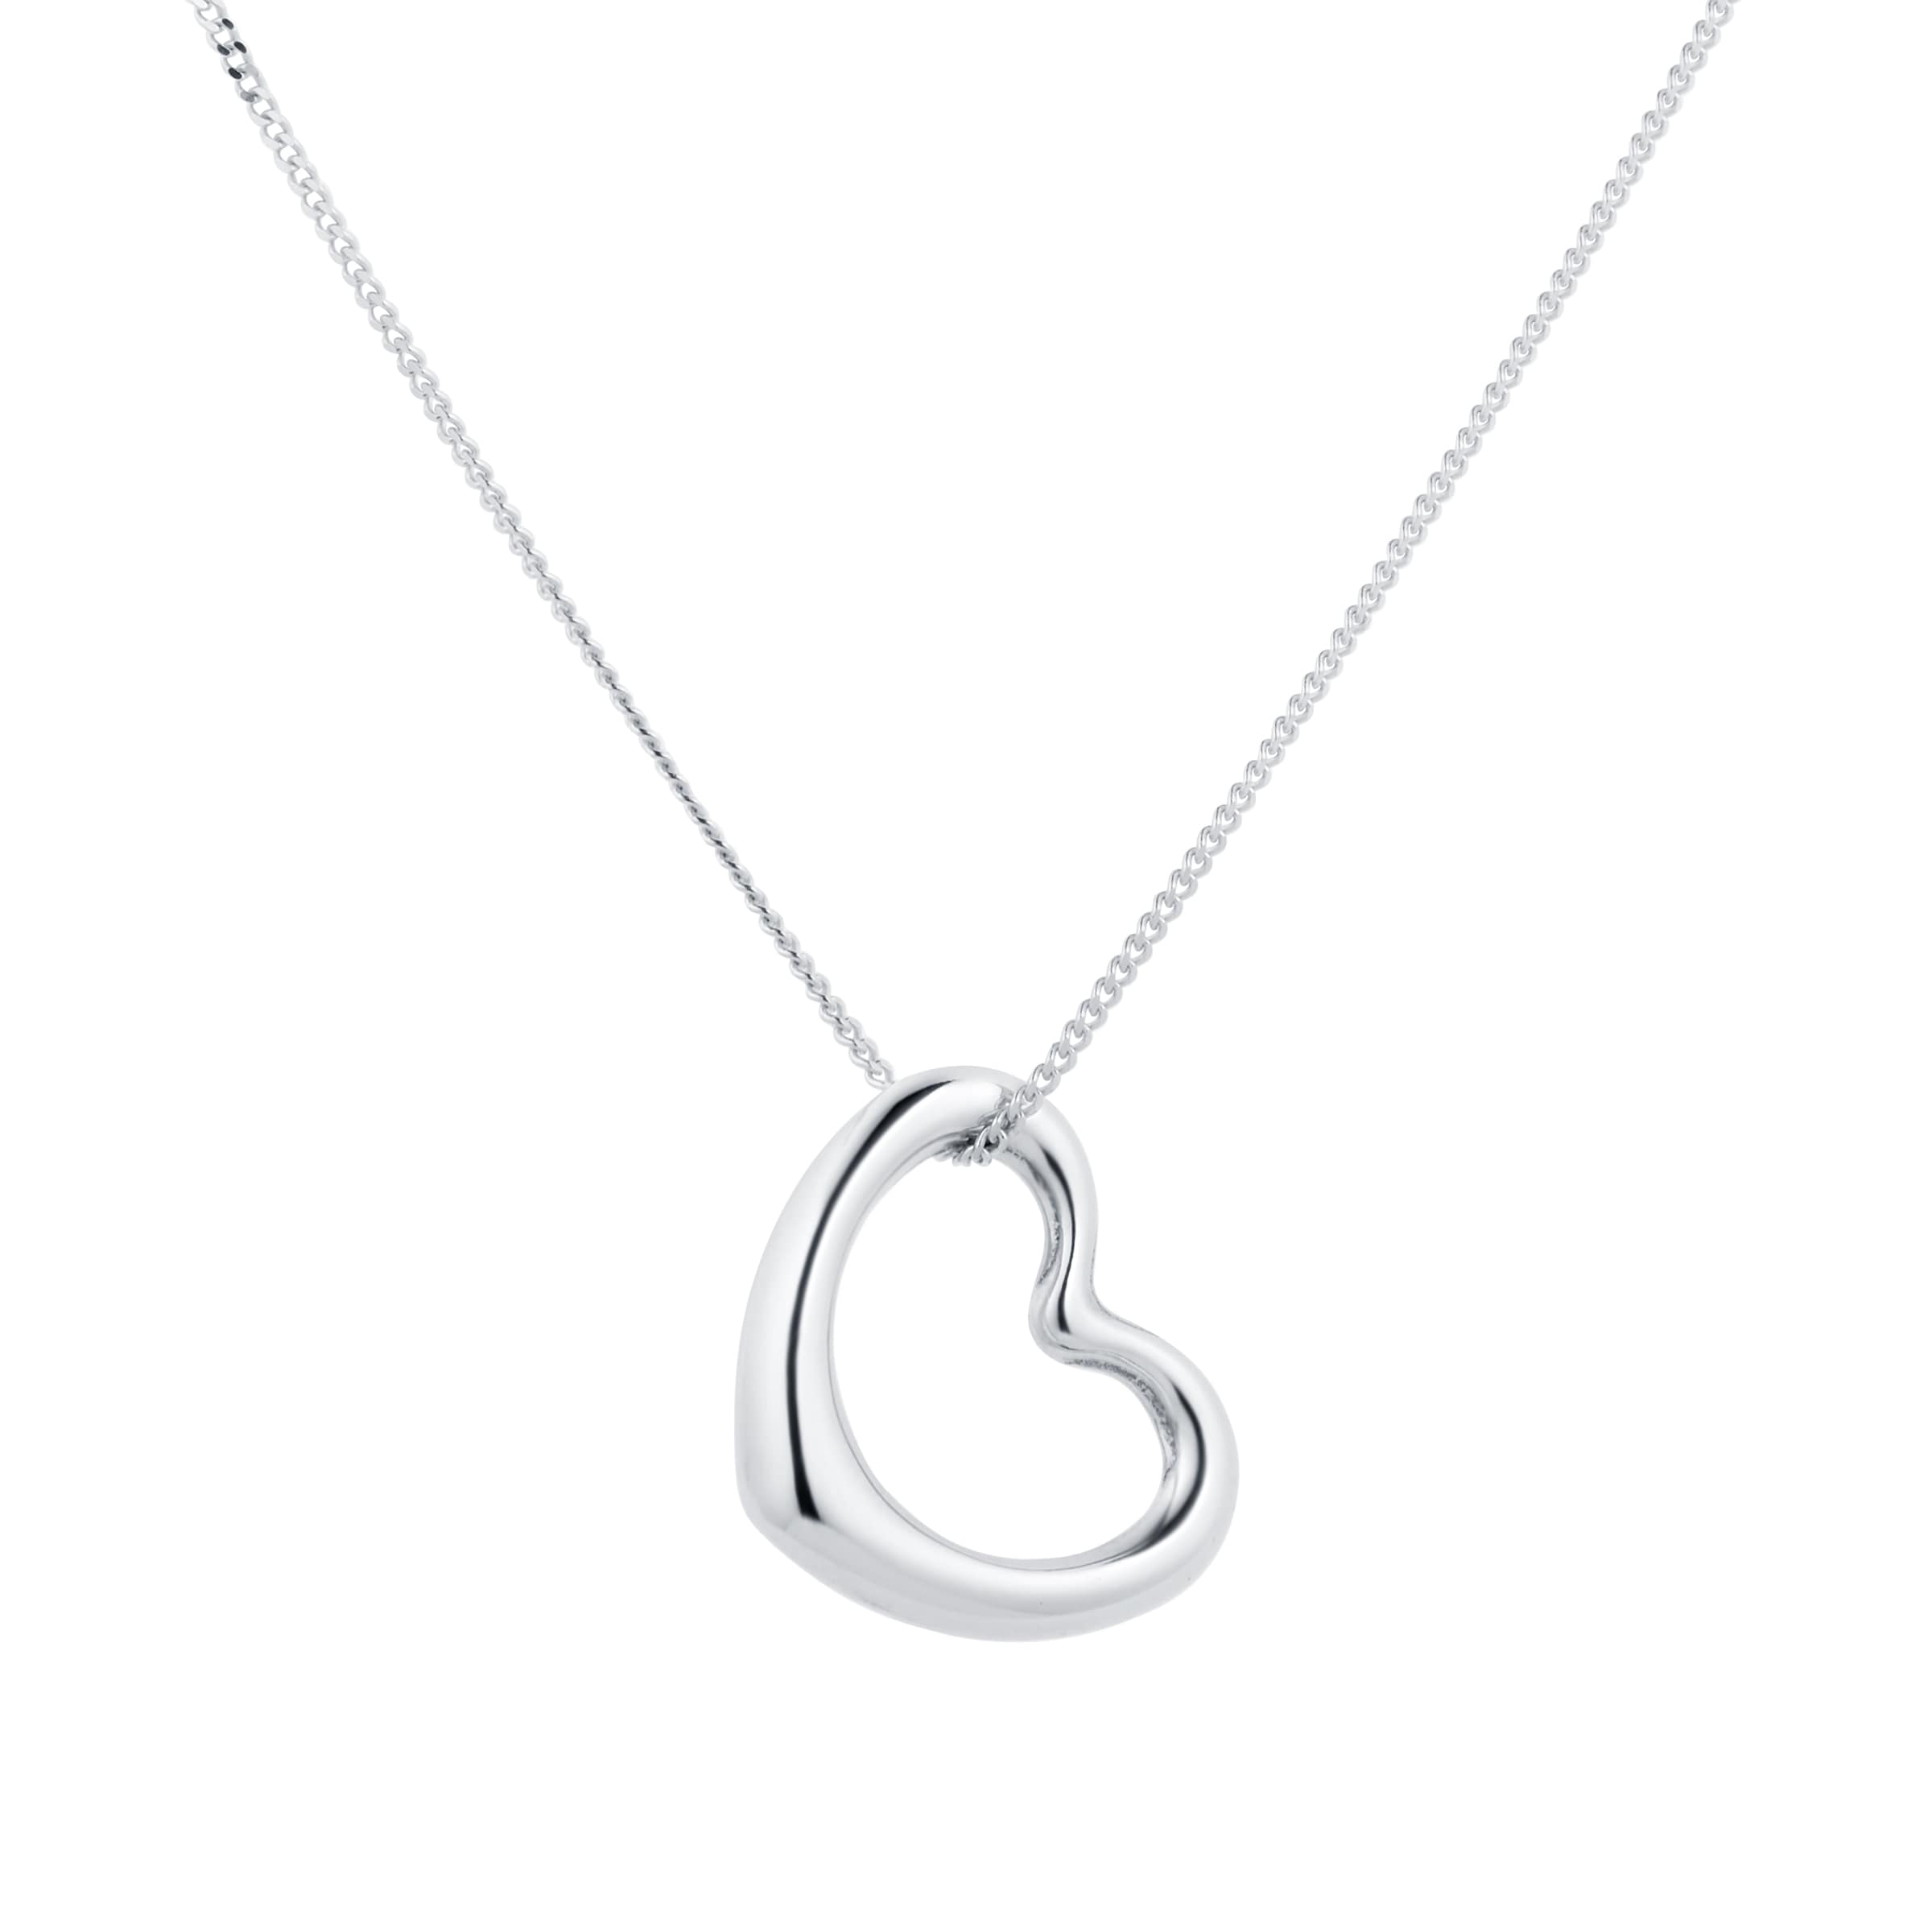 Bloomingdale's Diamond Heart Pendant Necklace in 14K White Gold, 0.25-1.0  ct. t.w. - 100% Exclusive | Bloomingdale's